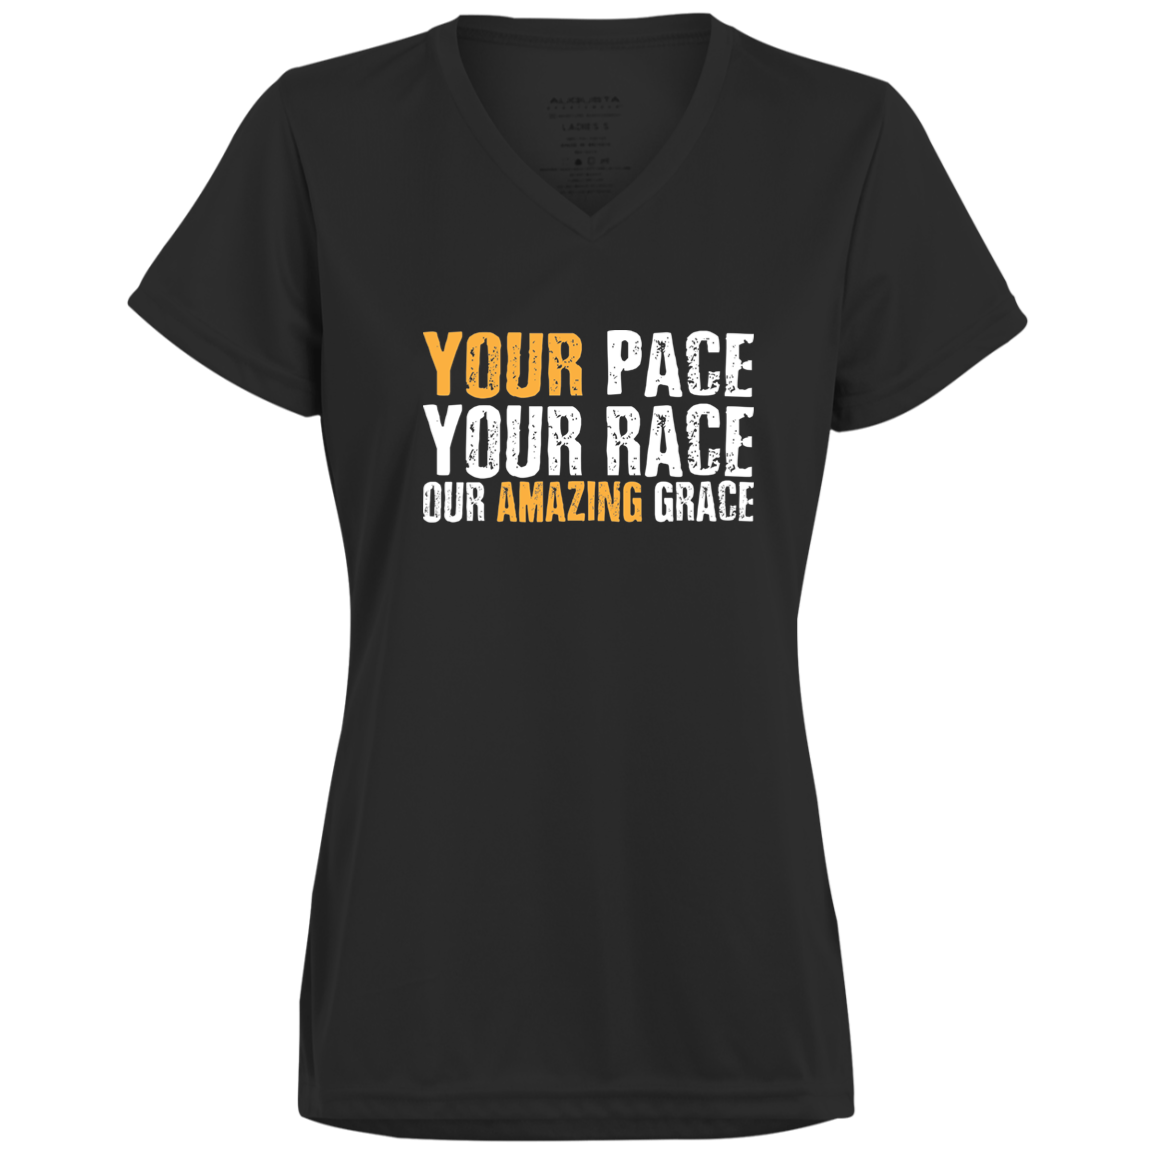 Women's Inspirational Top |Your Pace, Race and Amazing Grace